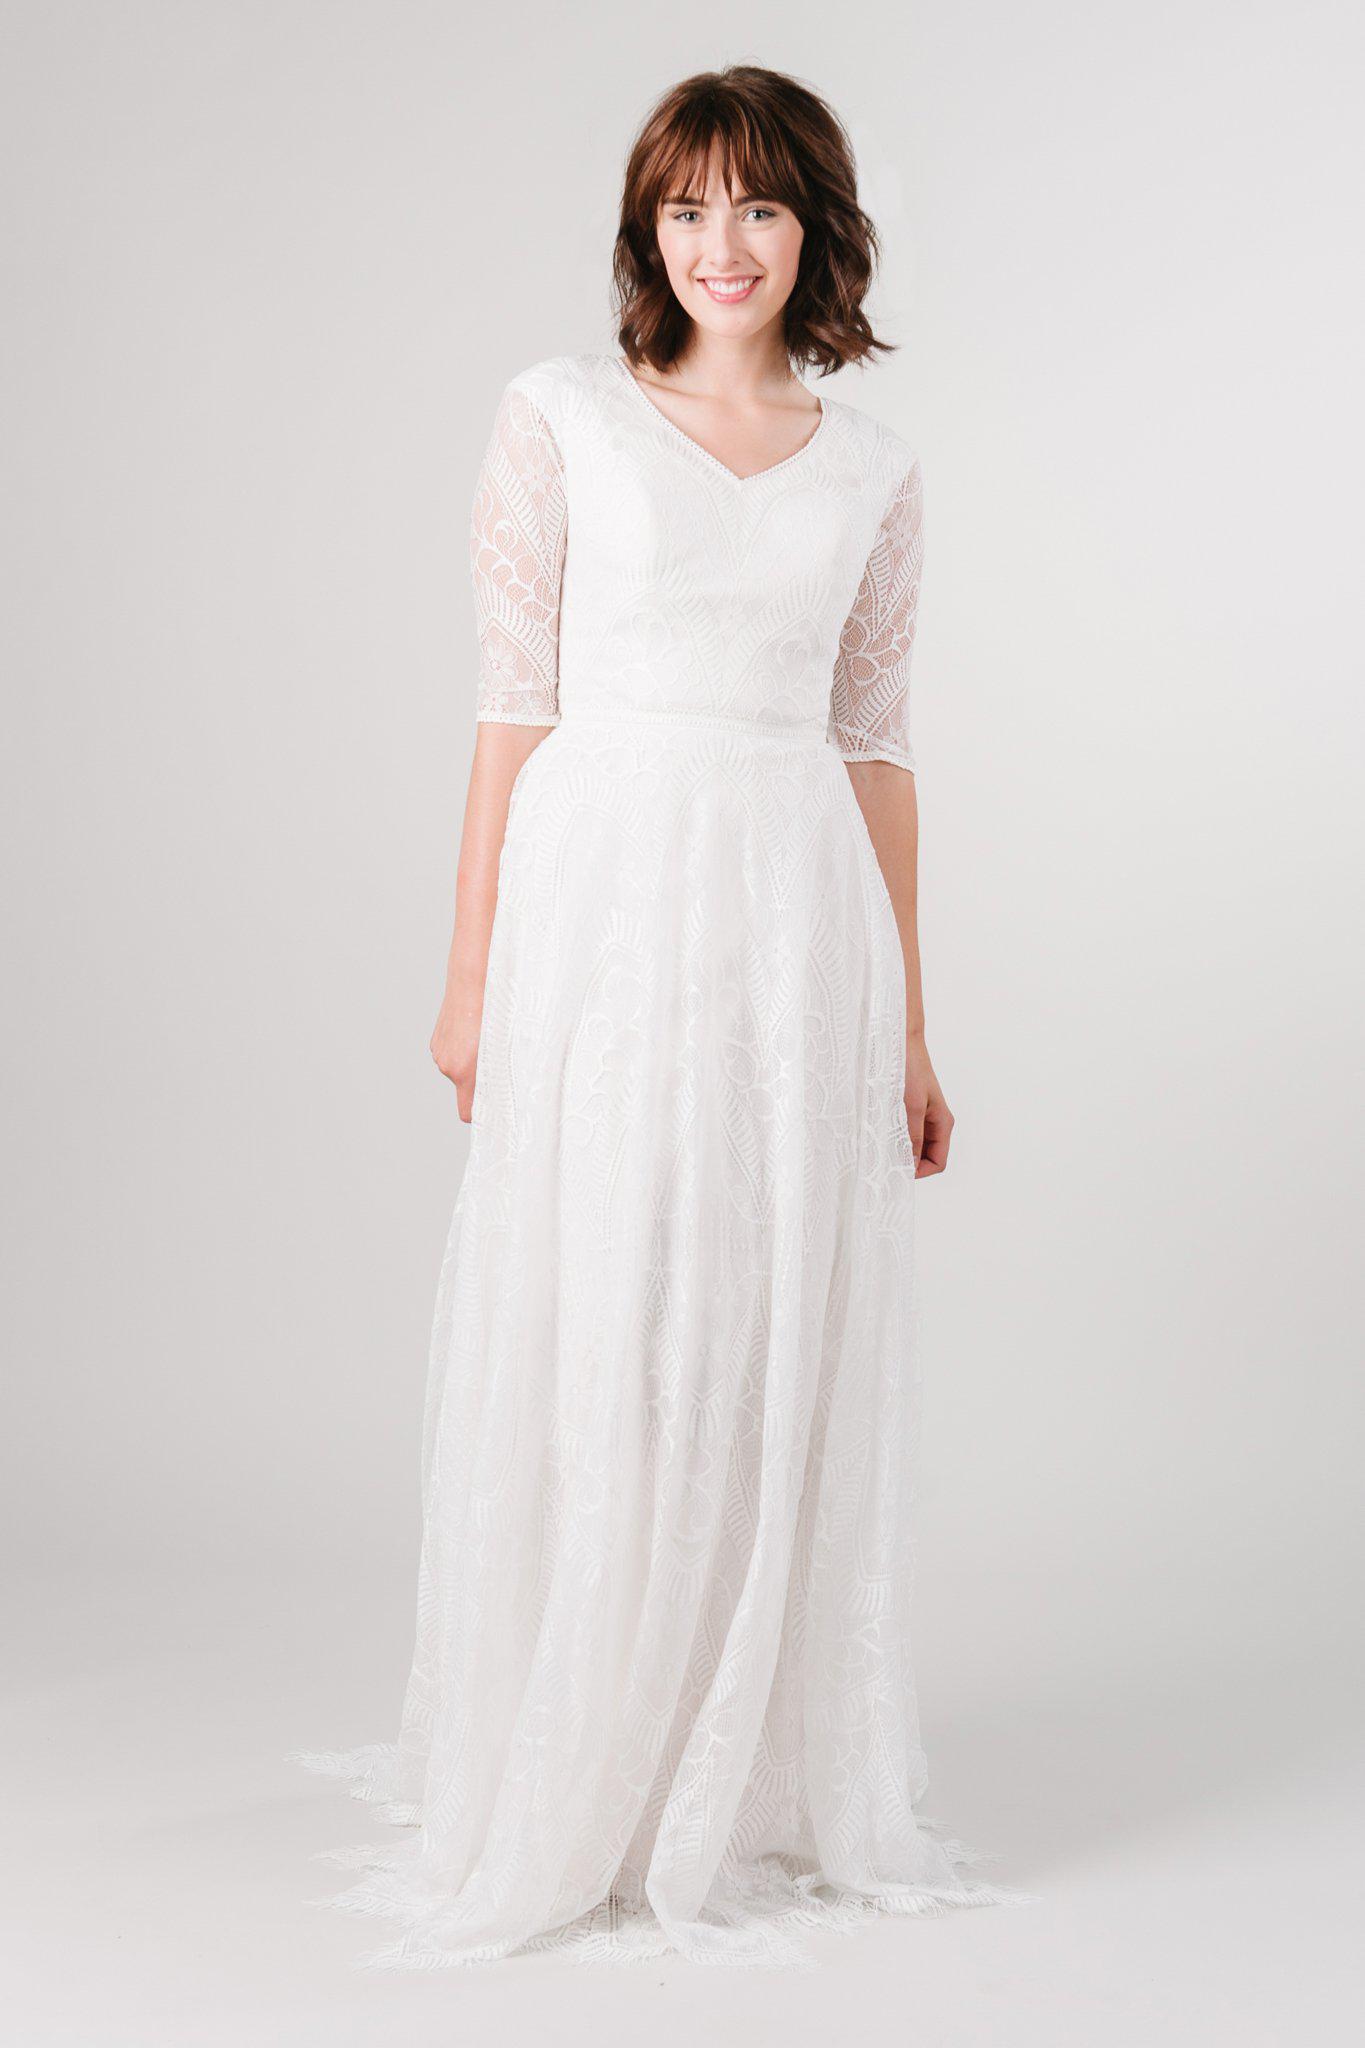 Front view of a modest wedding ballgown with lace details from LatterDayBride, a modest wedding dress shop in Salt Lake City, Utah